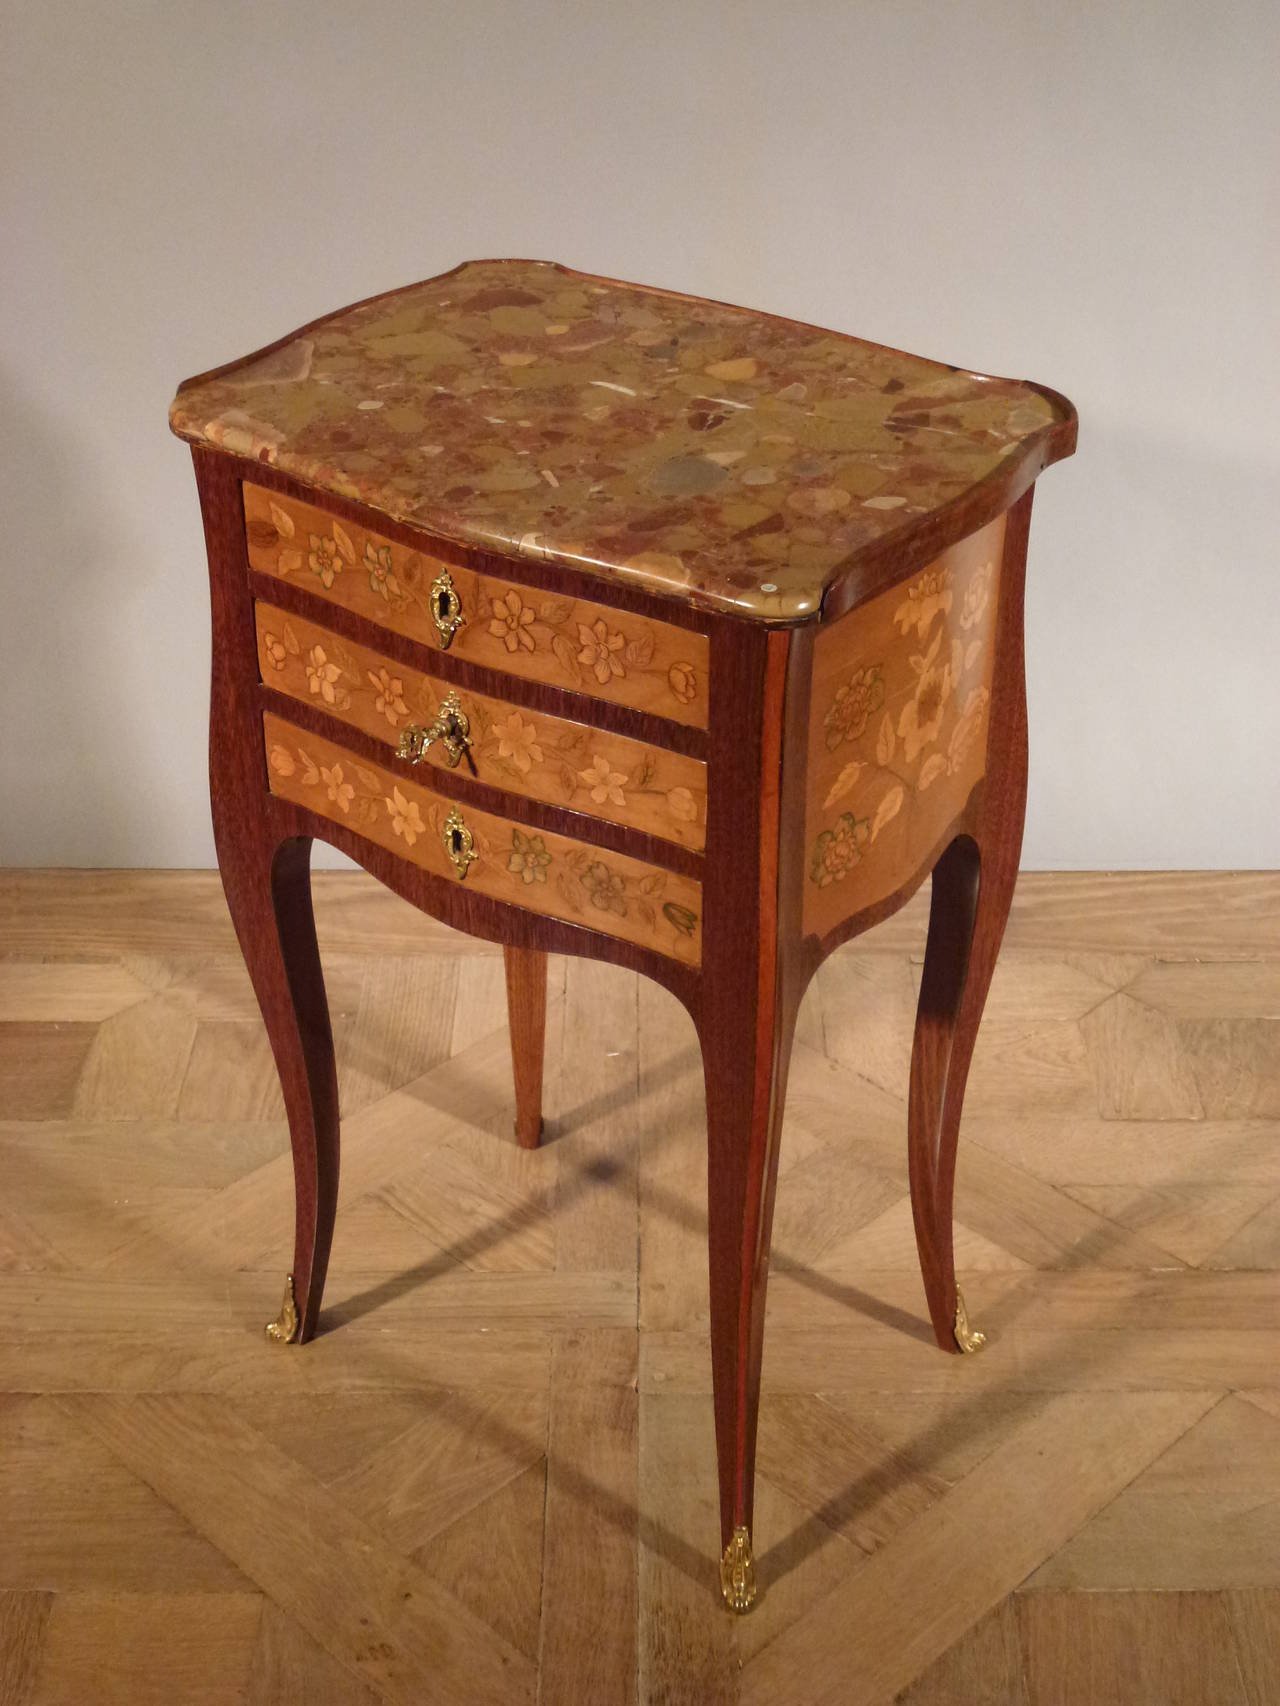 This elegant table has a rectangular moulded brèche d'Alep marble top in a three-quarter gallery above three drawers inlaid with flowers-sprays. The upper drawer contains a green leather writing surface. Both sides are inlaid with scroll  flower